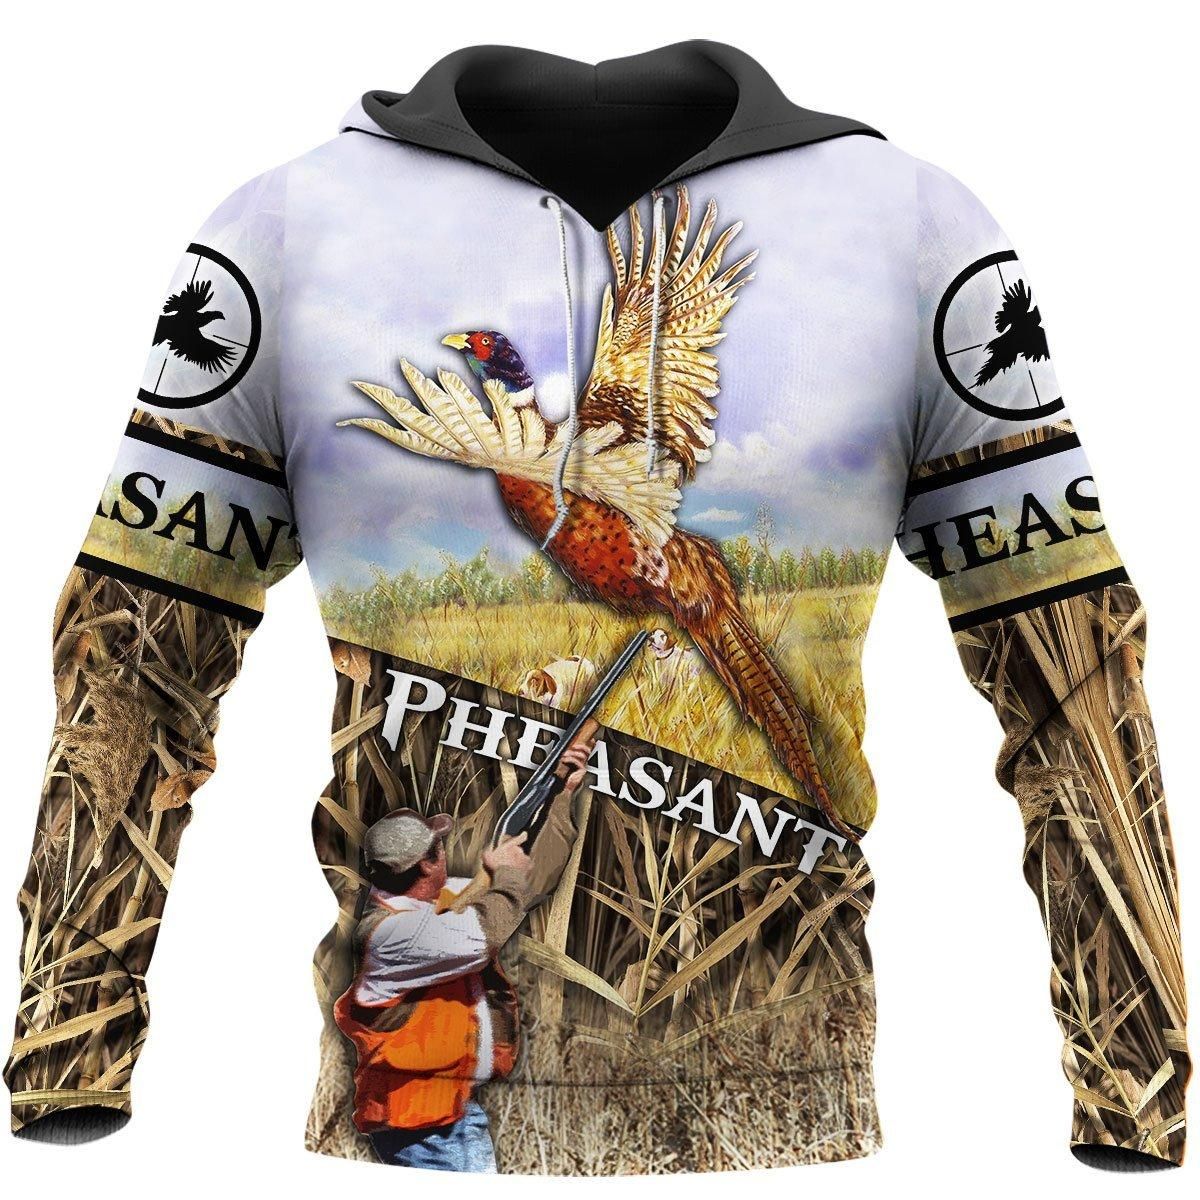 PHEASANT HUNTING 3D ALL OVER PRINTED SHIRTS MP914